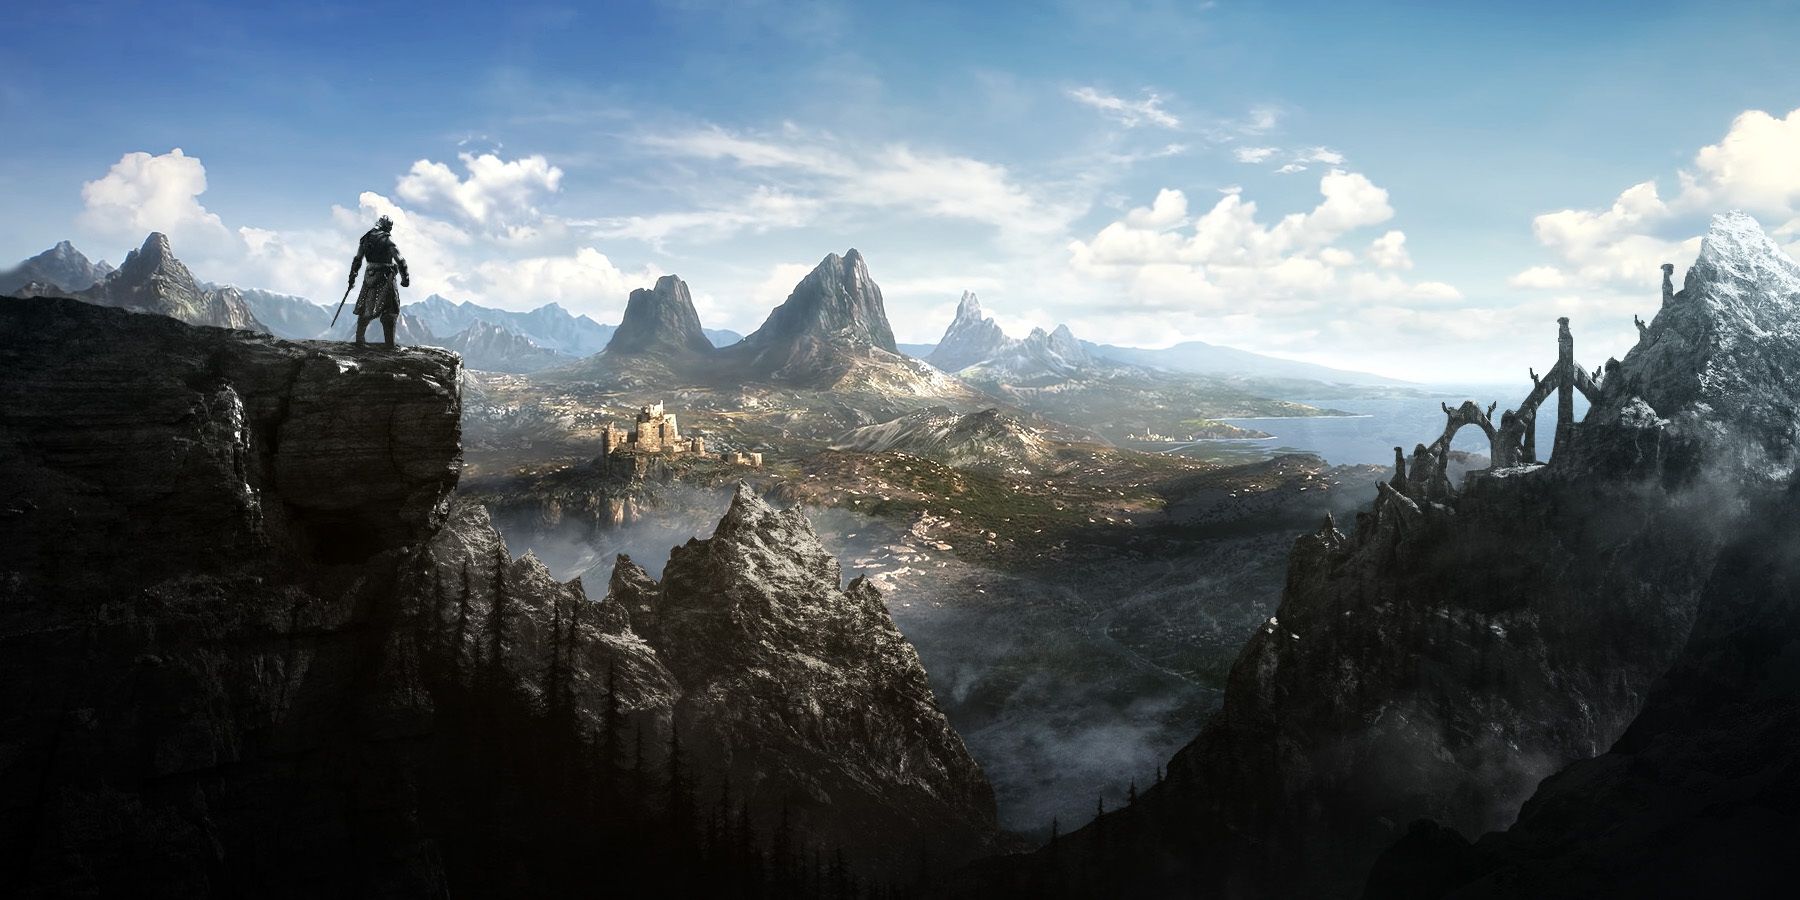 The Elder Scrolls 6 is now in 'early development,' Bethesda confirms